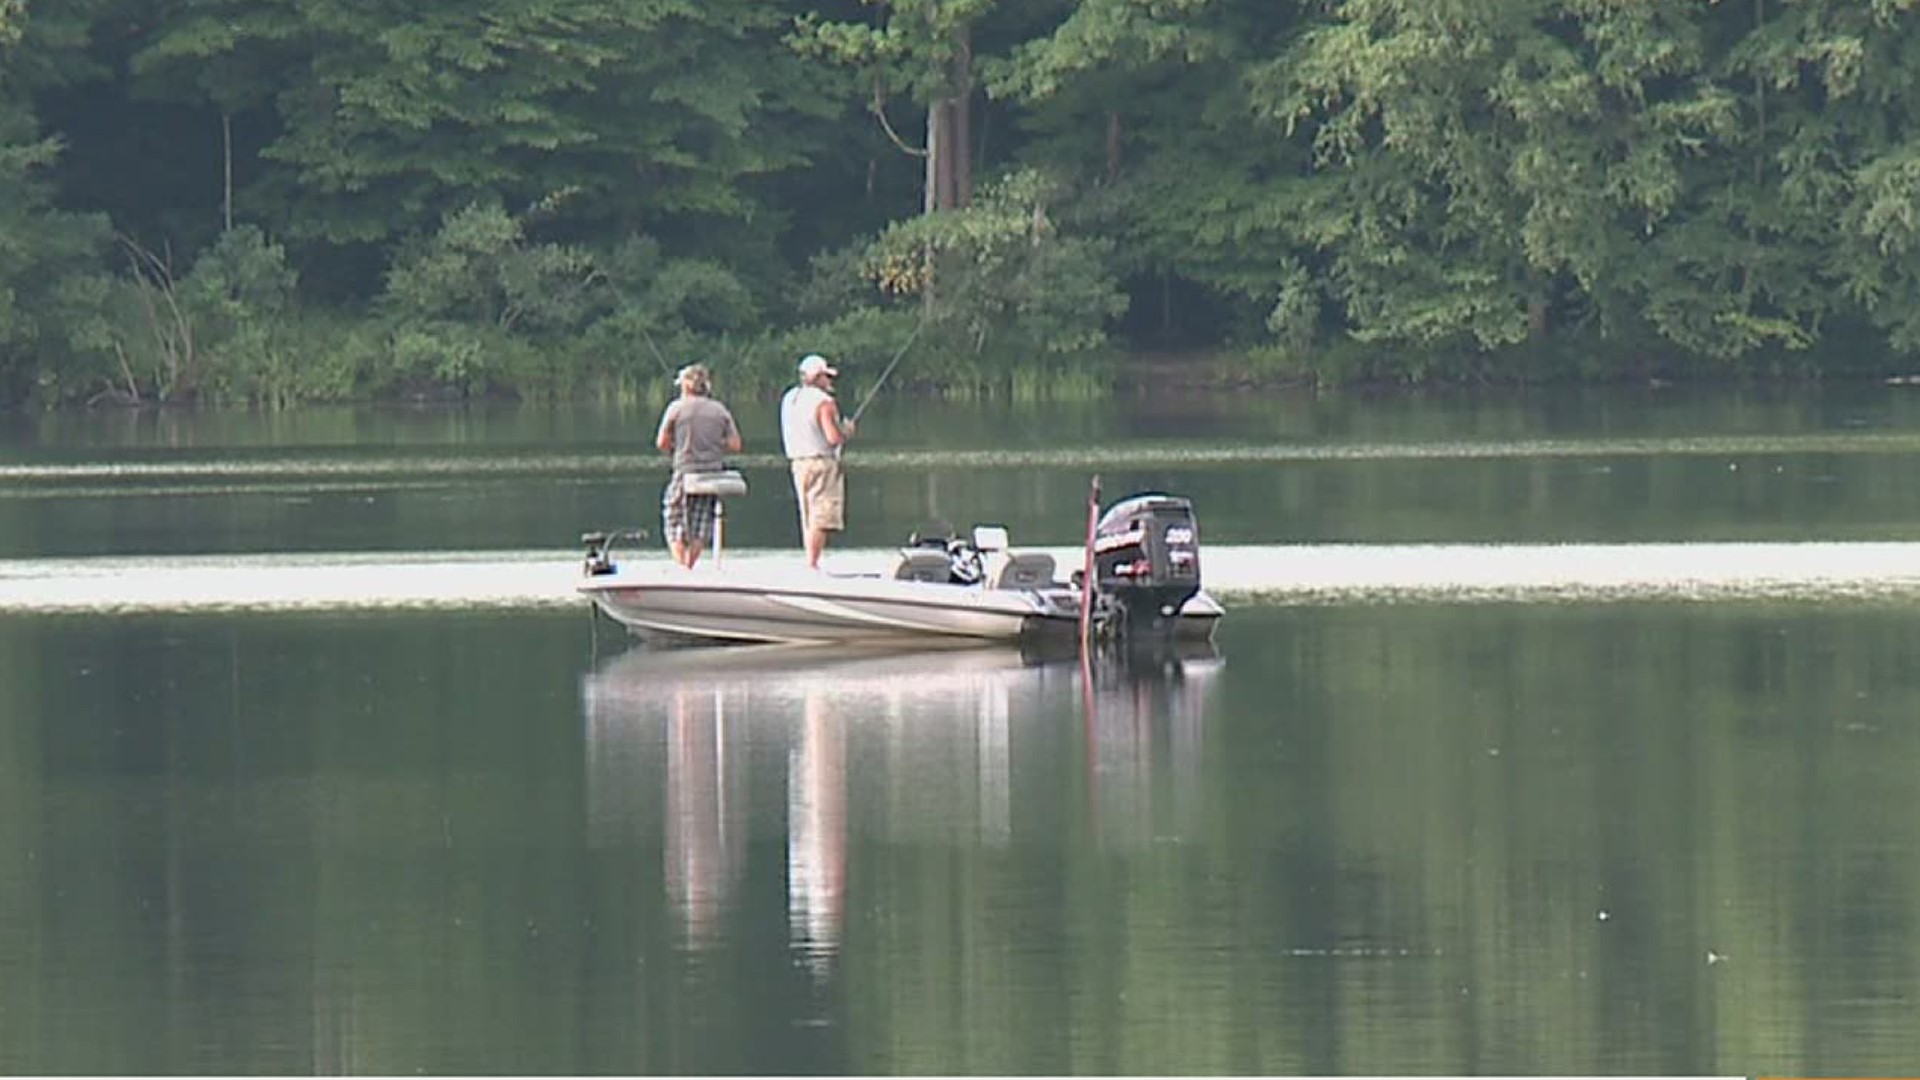 The goal of the tournament in Lackawanna County is to promote bass fishing and simply have a little bit of fun.